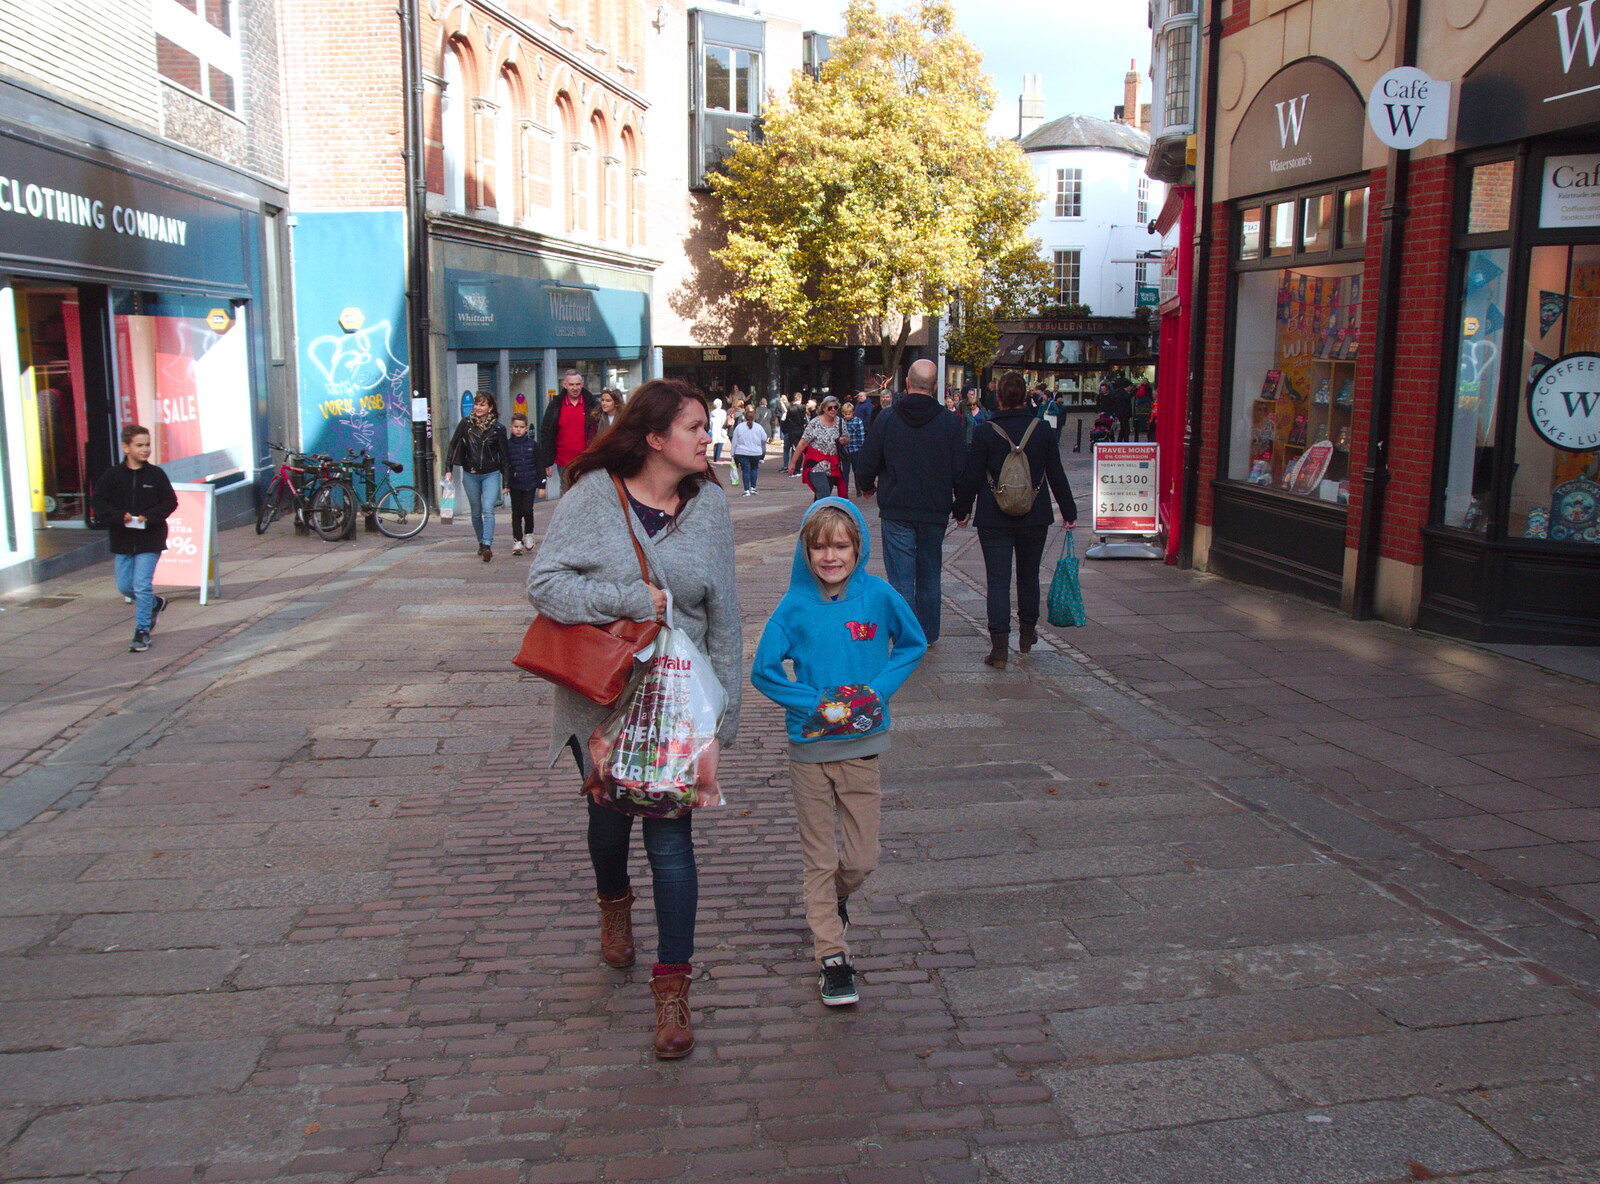 Isobel and Harry on Castle Street from A Trip up the Big City, Norwich, Norfolk - 18th October 2019